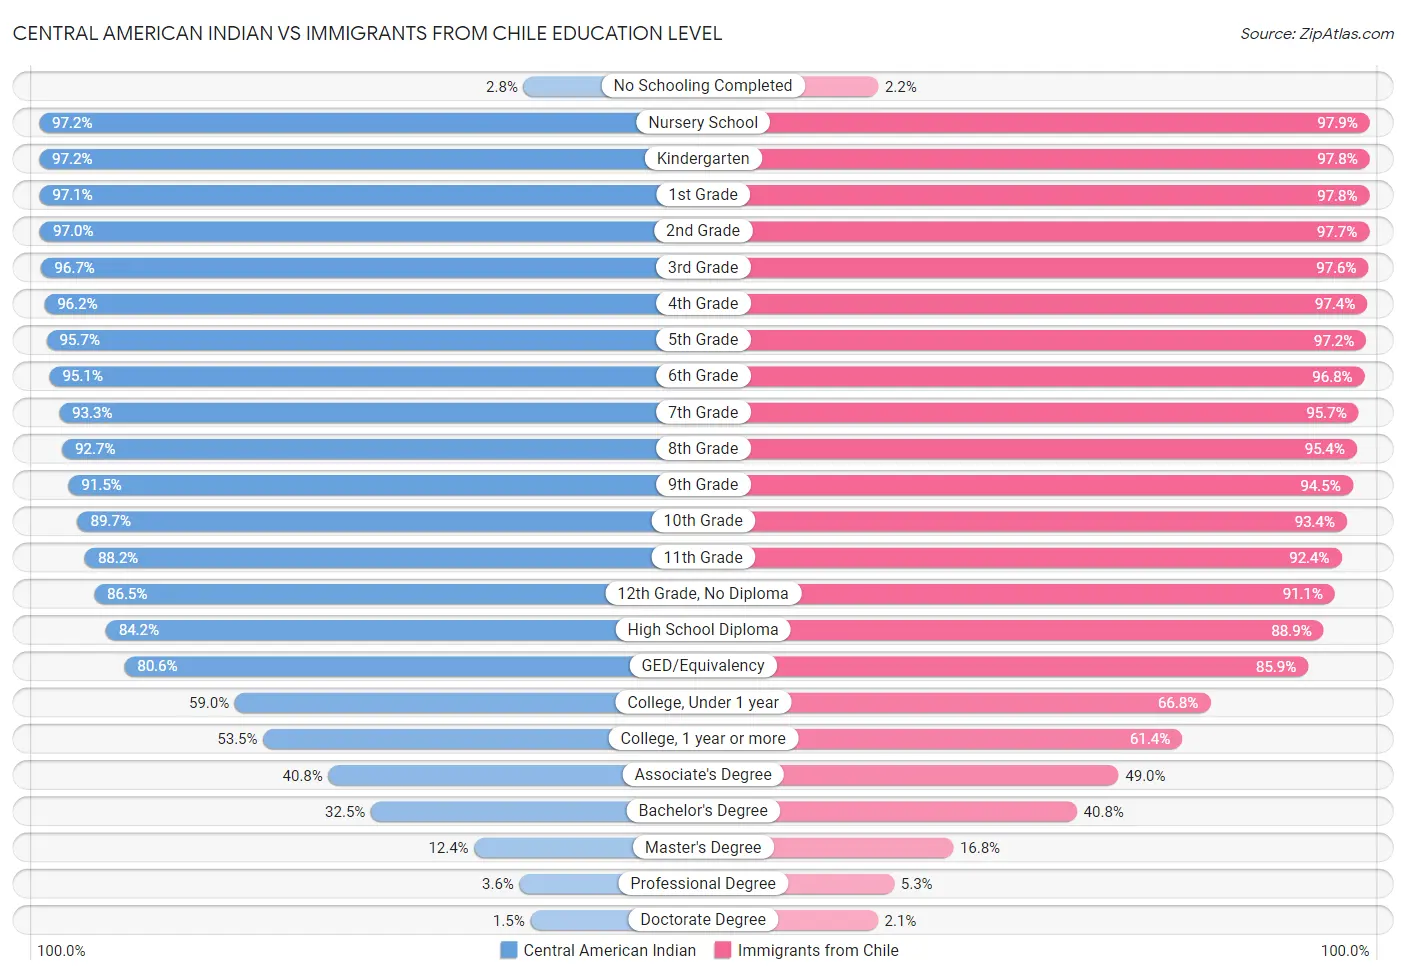 Central American Indian vs Immigrants from Chile Education Level